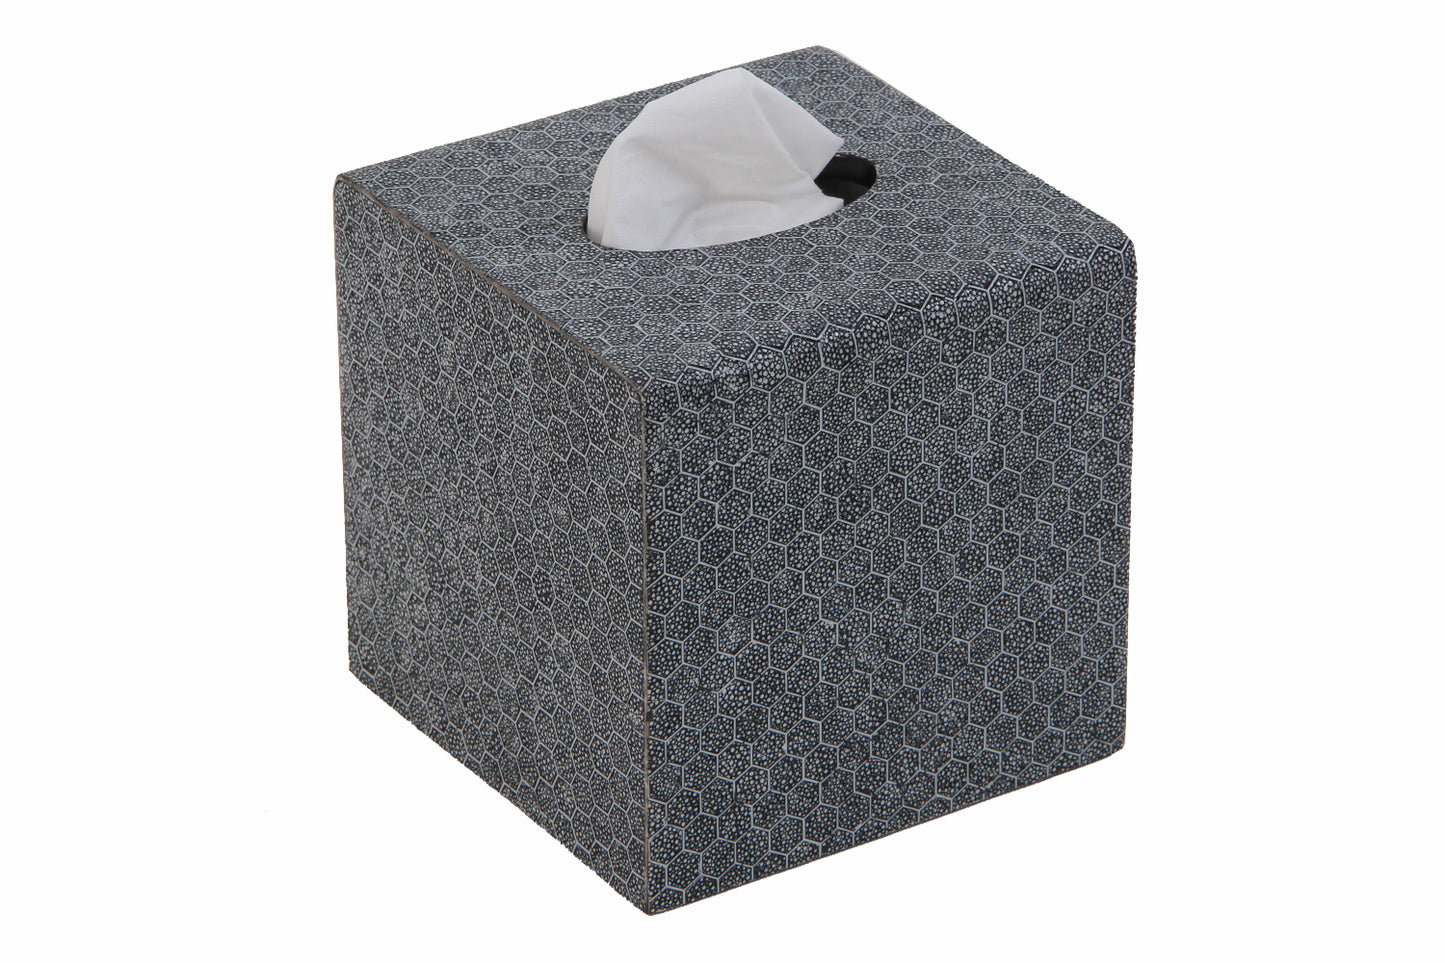 The Hex Tissue Box in Charcoal Shagreen